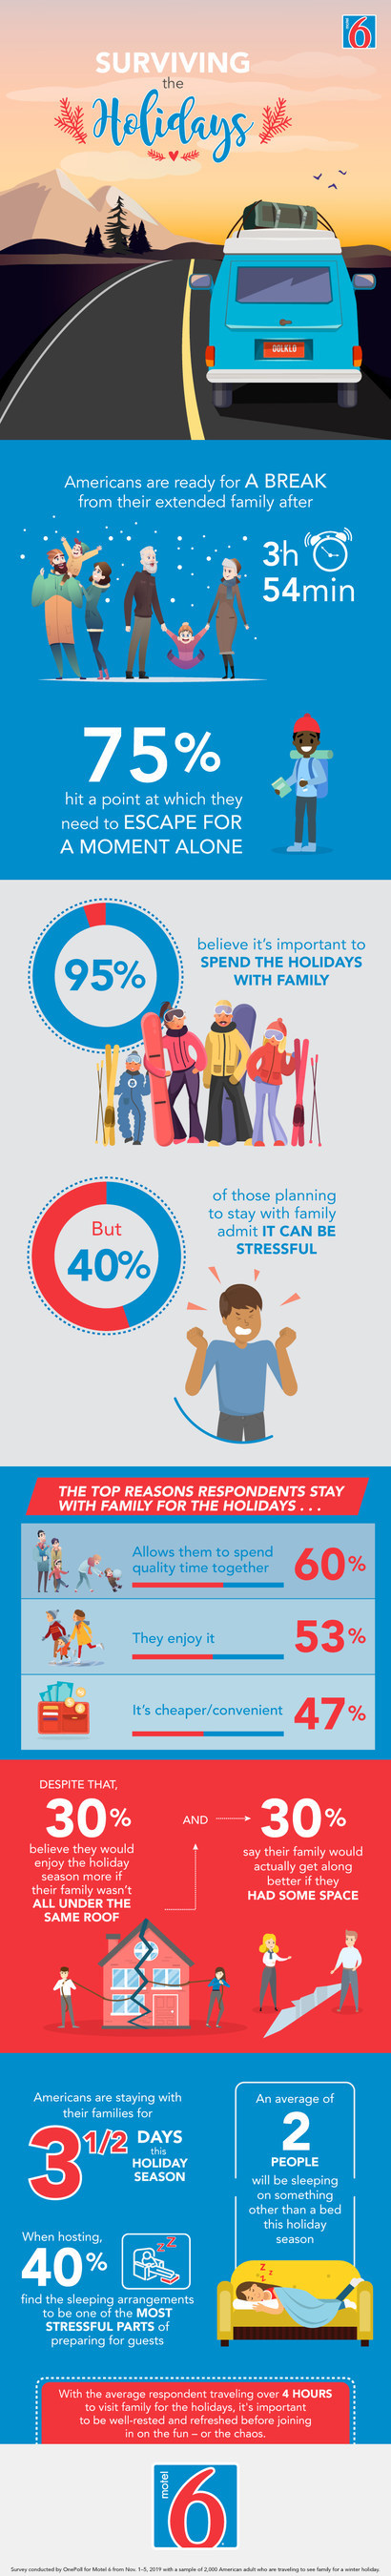 Surviving the Holidays: Motel 6 releases second annual holiday travel survey. (Infographic)